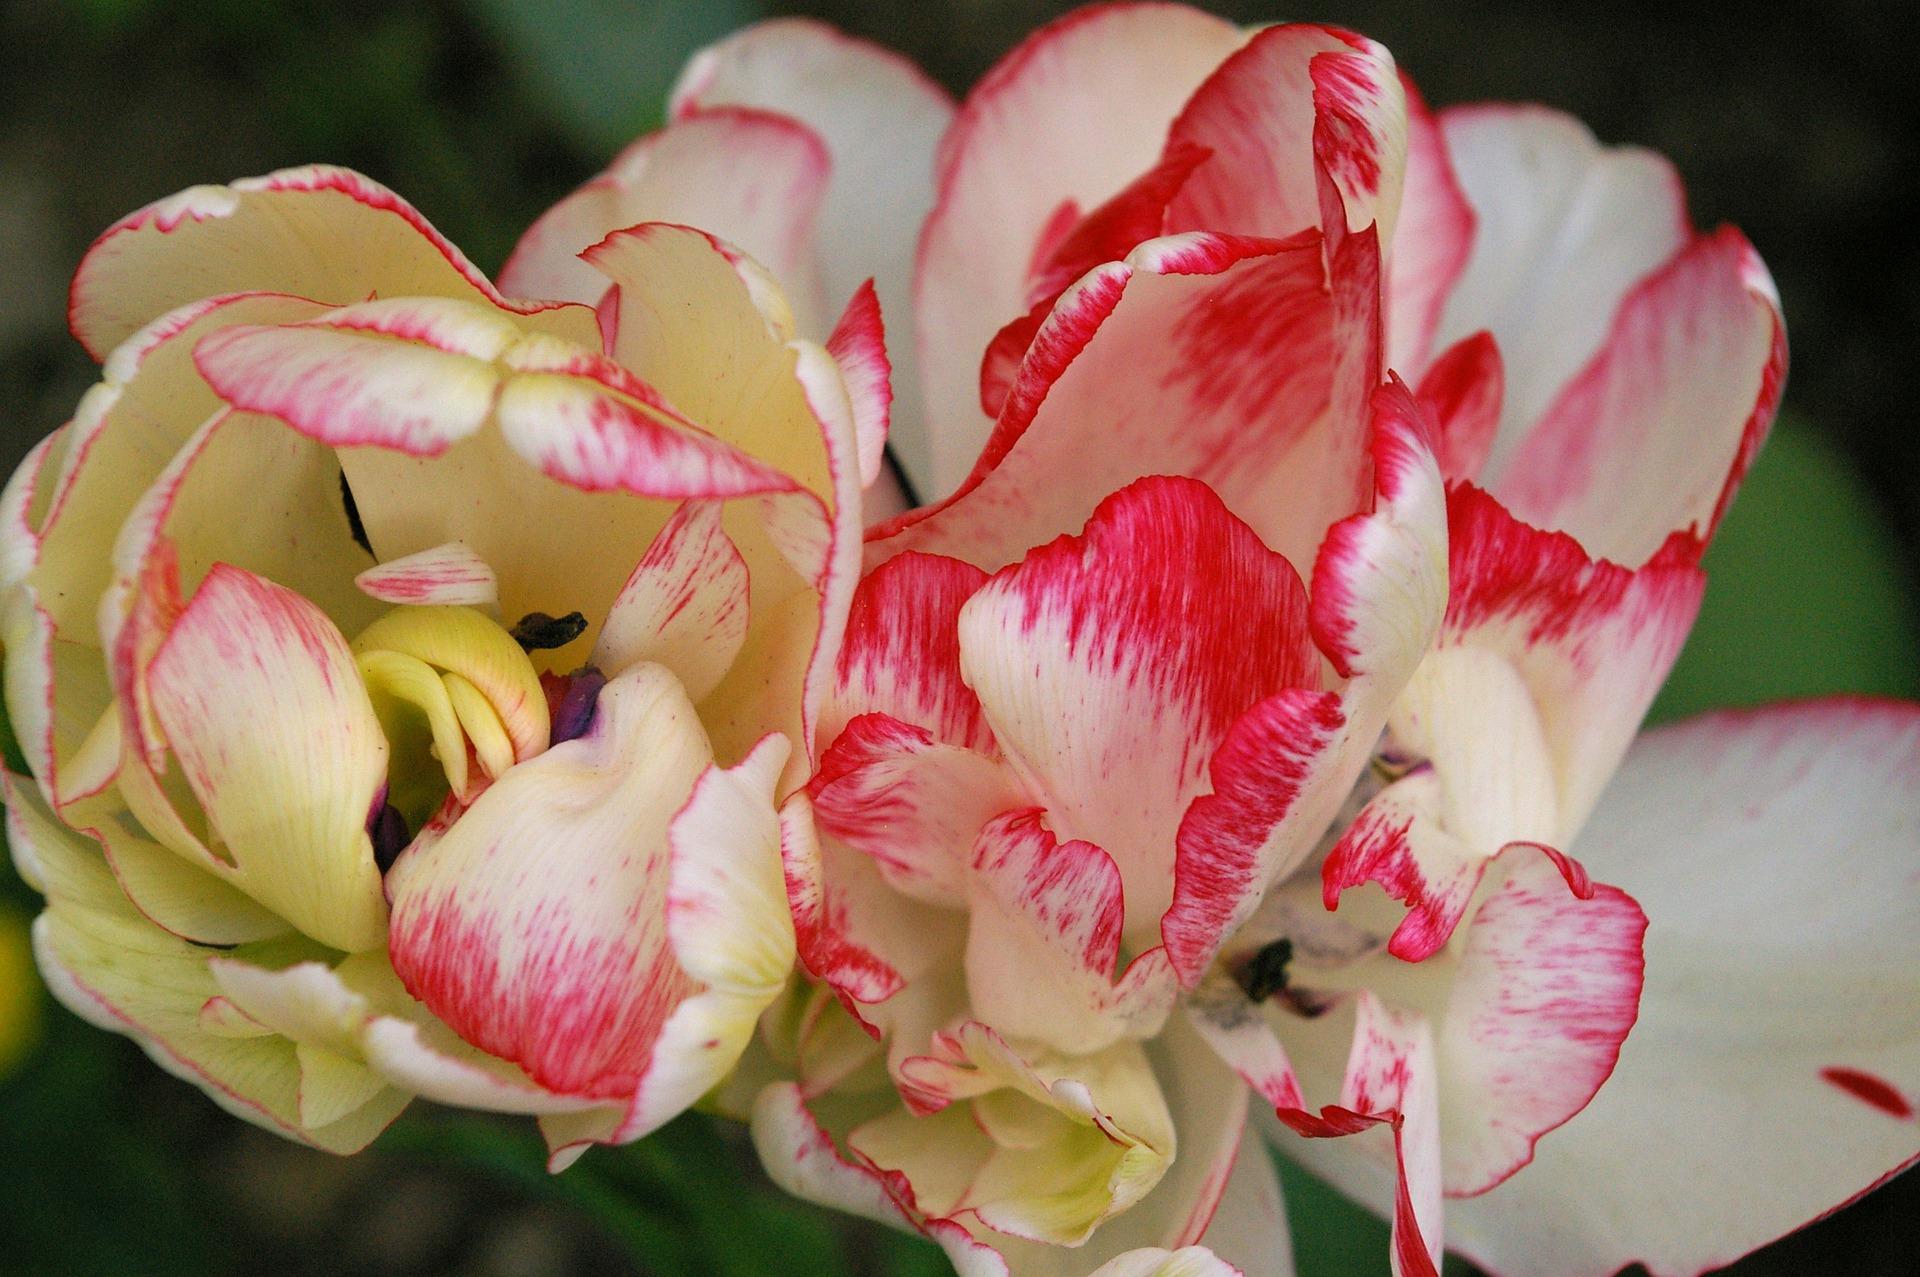 Tulip Double Early 'Belica' - Tulip - Pre-Order for Fall 2022 from Leo Berbee Bulb Company